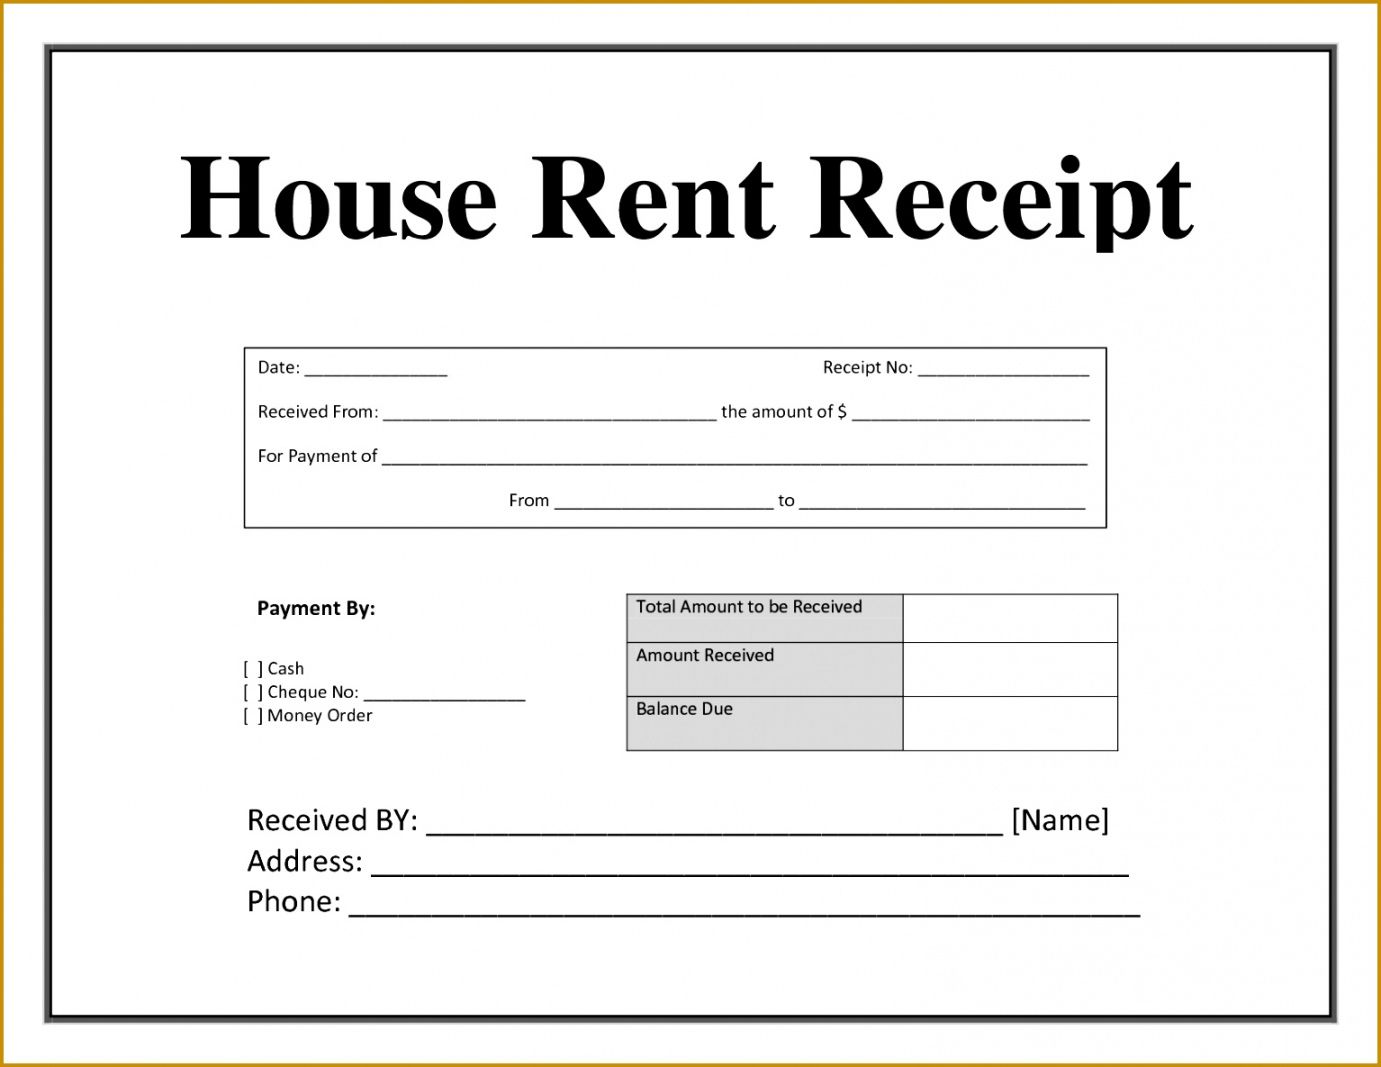 Monthly Rental Payment Receipt Template